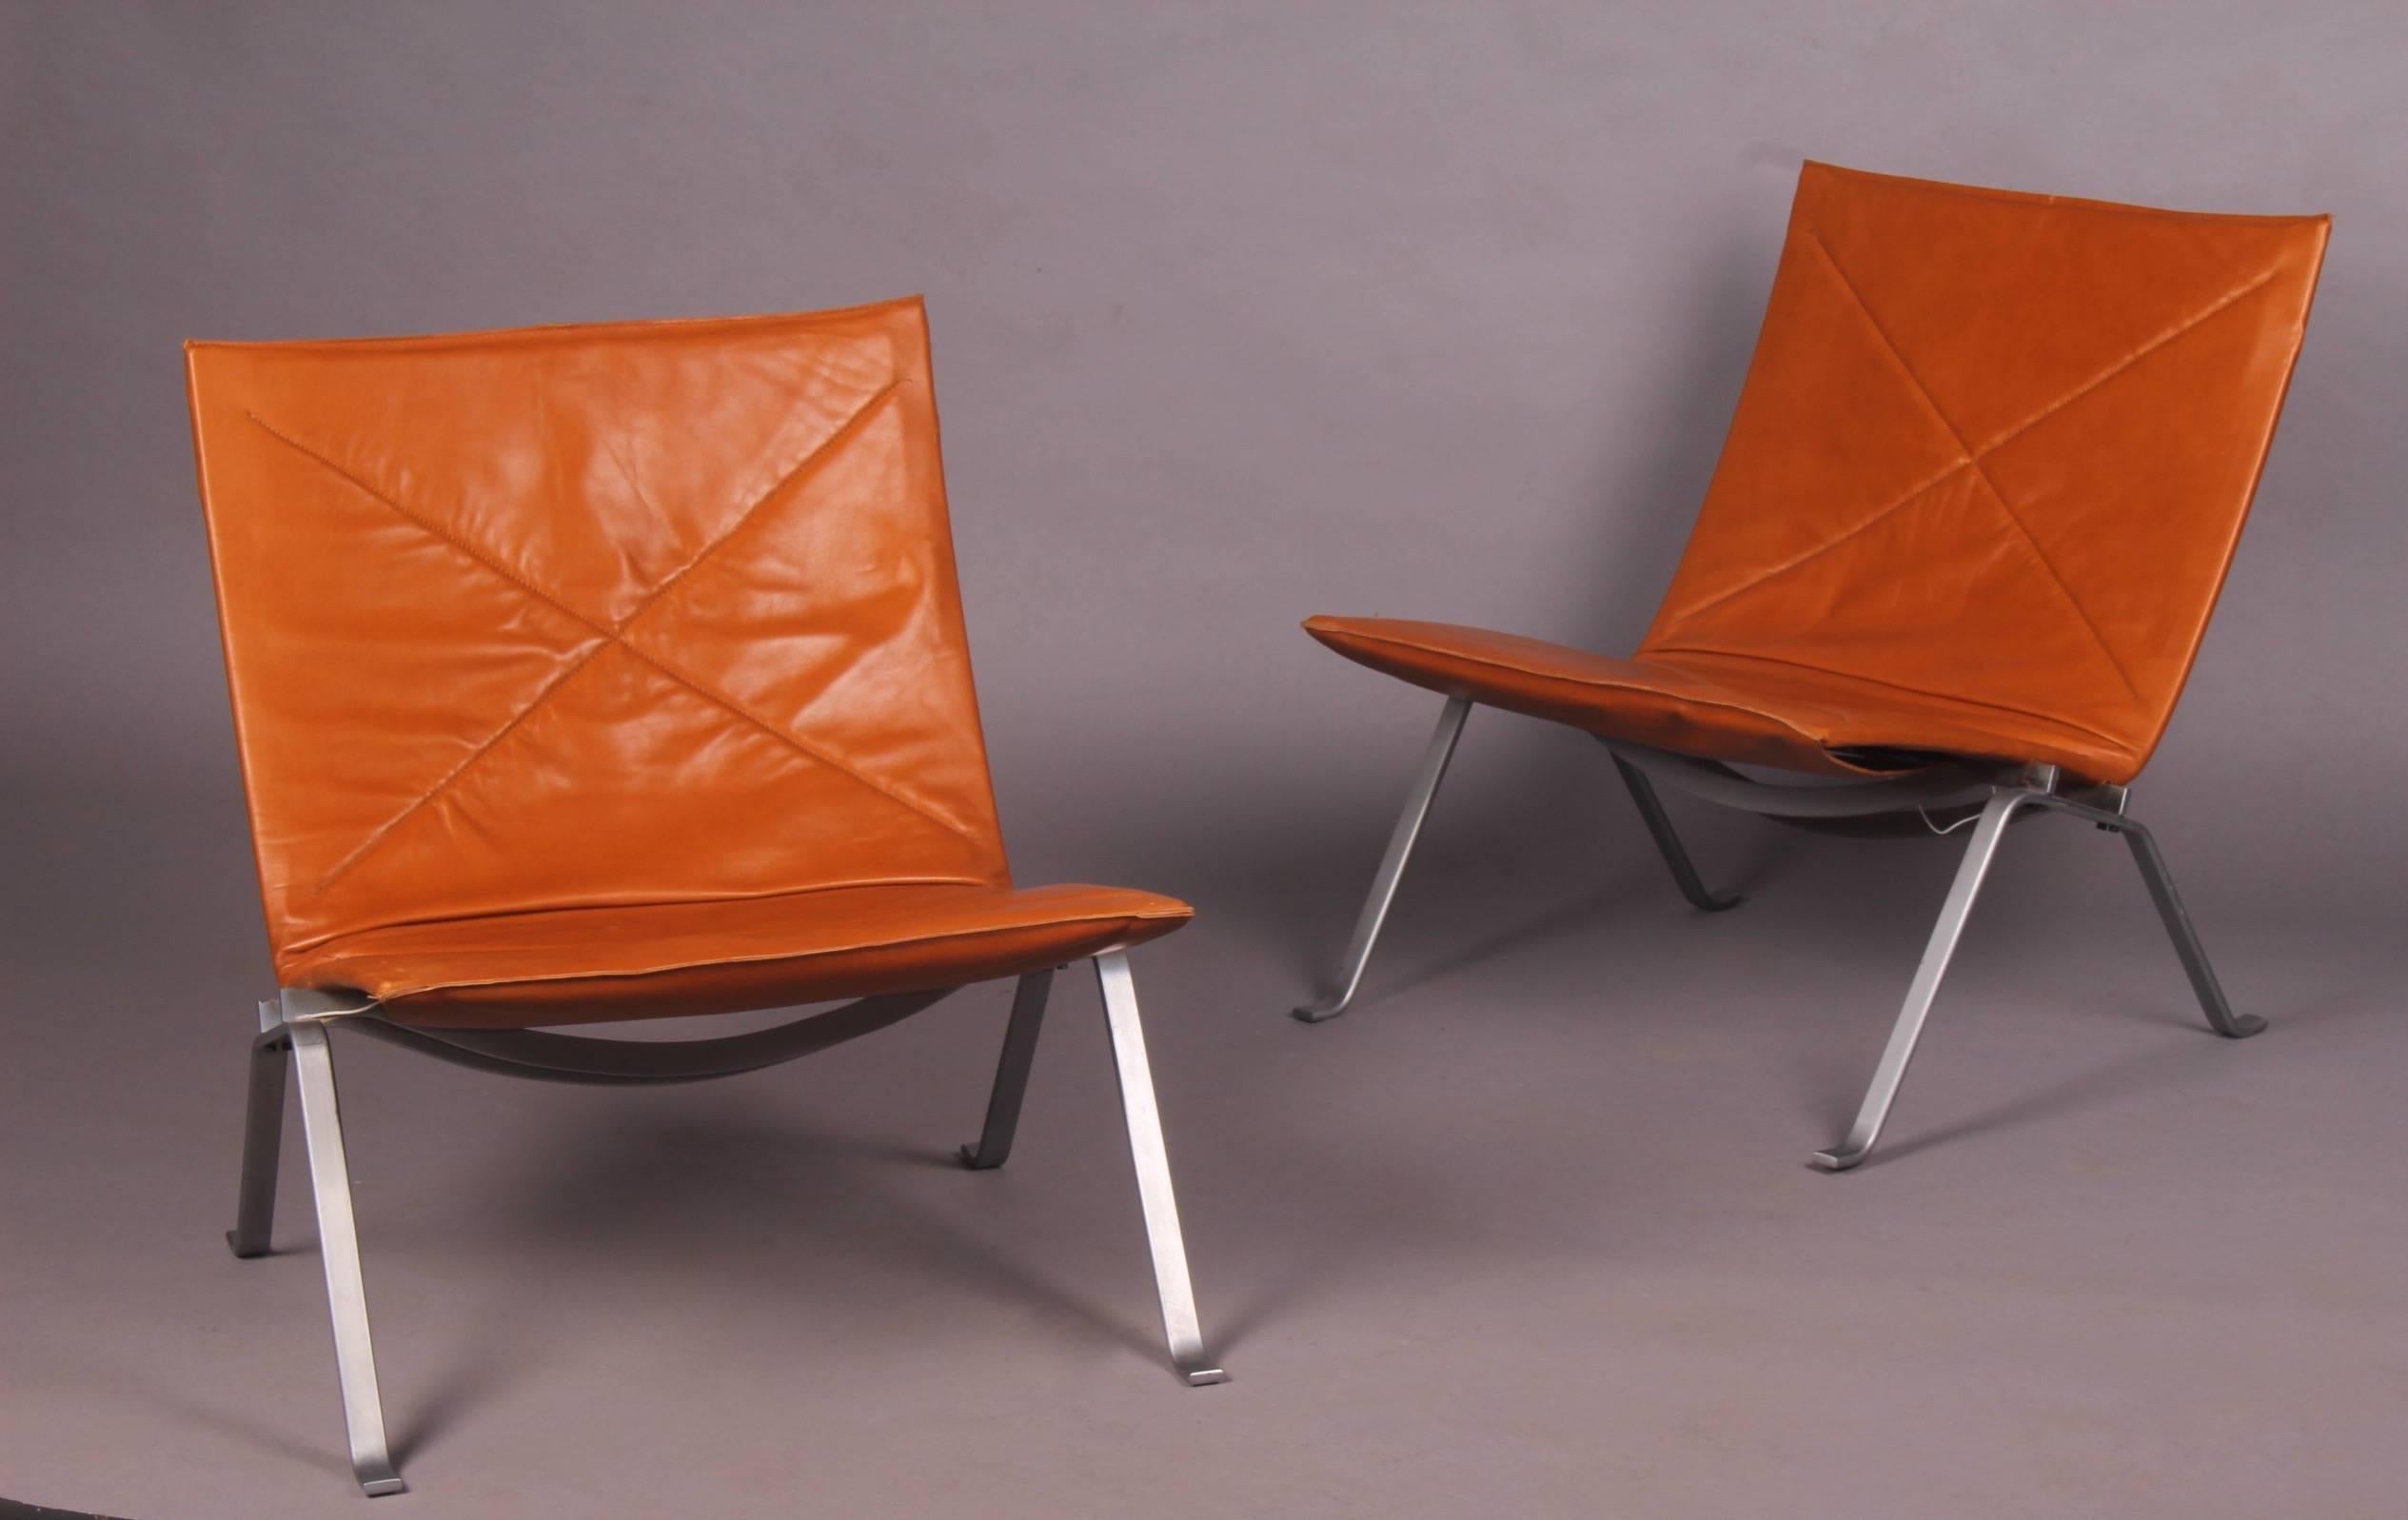 Poul Kjærholm PK 22 lounge chair, circa 1960, produced by E.Kold Christensen of Denmark. Havane leather cover is new, handmade by a Parisian craftsman to the exact specifications as the original. Frame stamped with the E. Kold Christensen symbol.